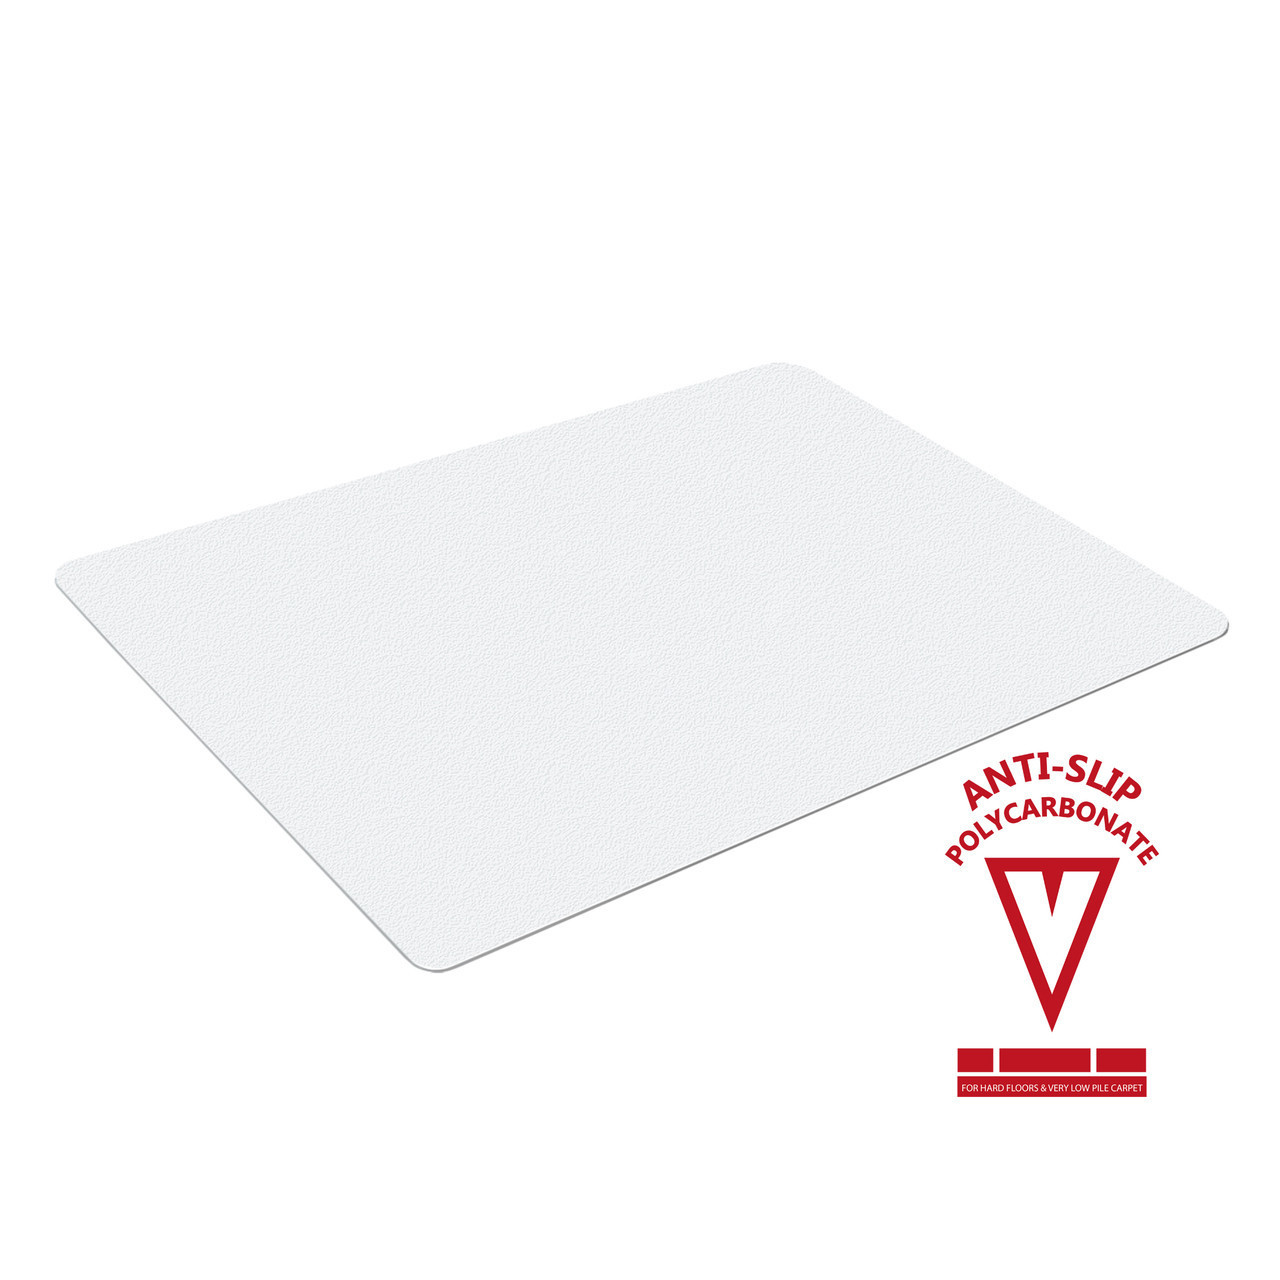 Marvelux Anti-Slip Backed Polycarbonate Chair Mat for Hard Floors and Very  Low Pile Carpets, Rectangular Floor Protector, Hardwood Floor Protector